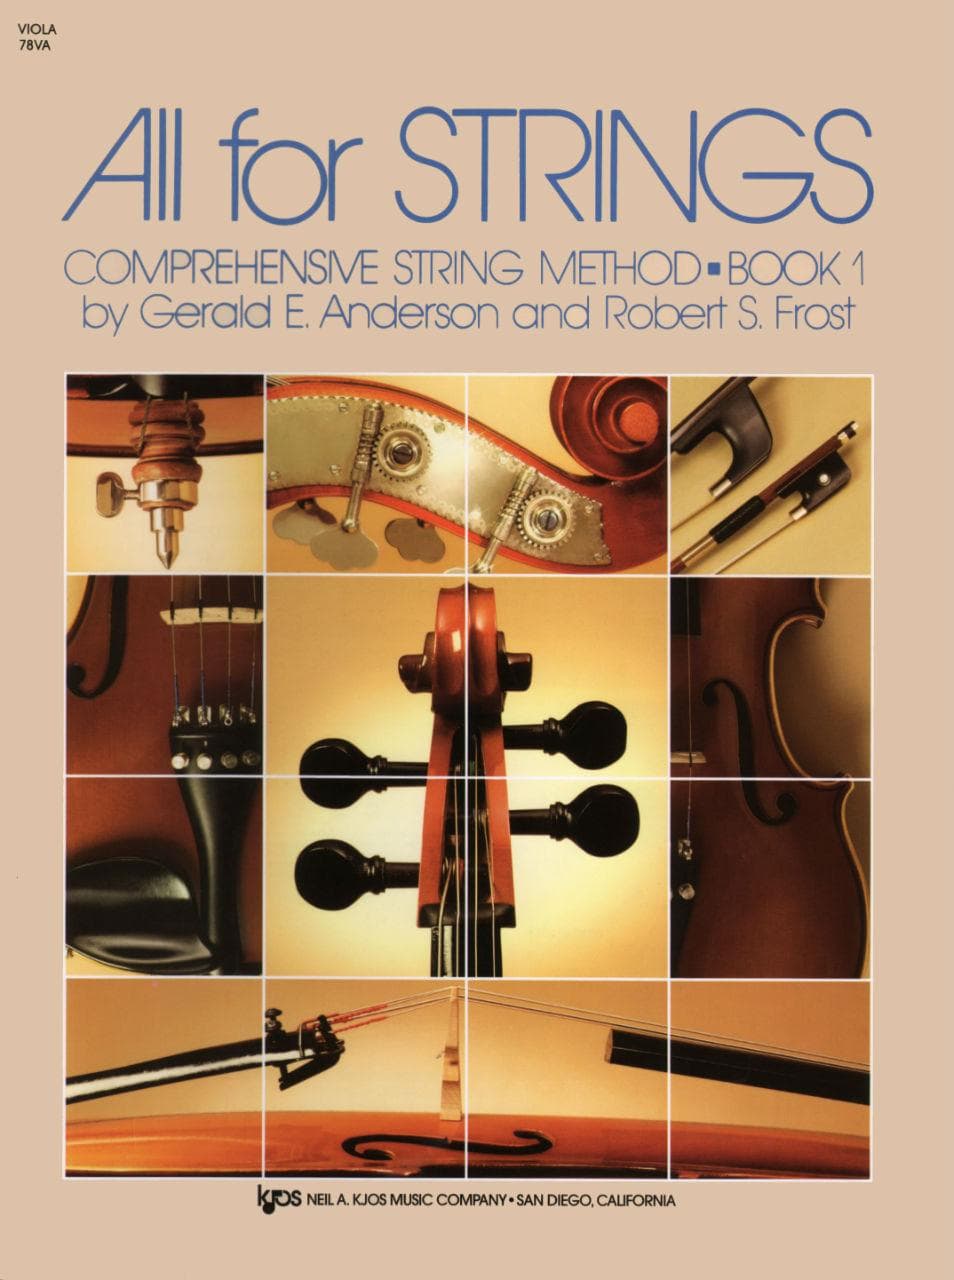 All For Strings Comprehensive String Method - Book 1 for Viola by Gerald E Anderson and Robert S Frost